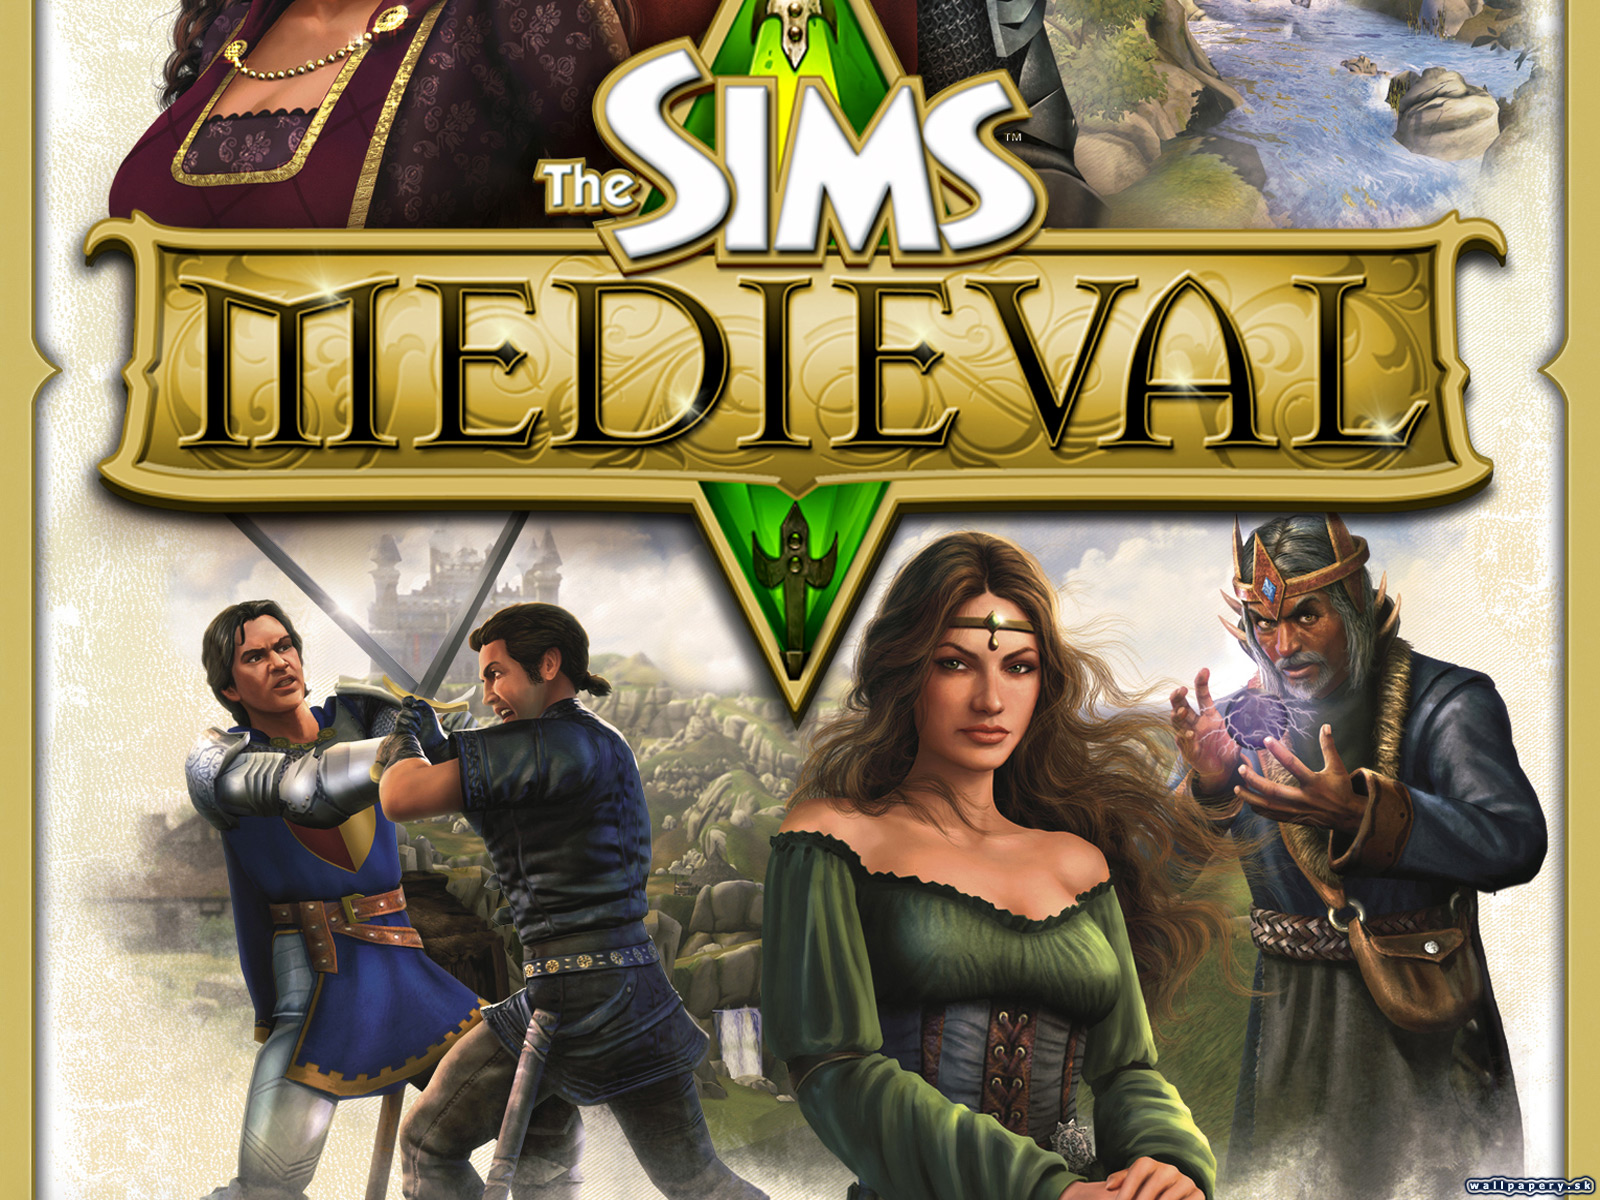 The Sims Medieval - wallpaper 2